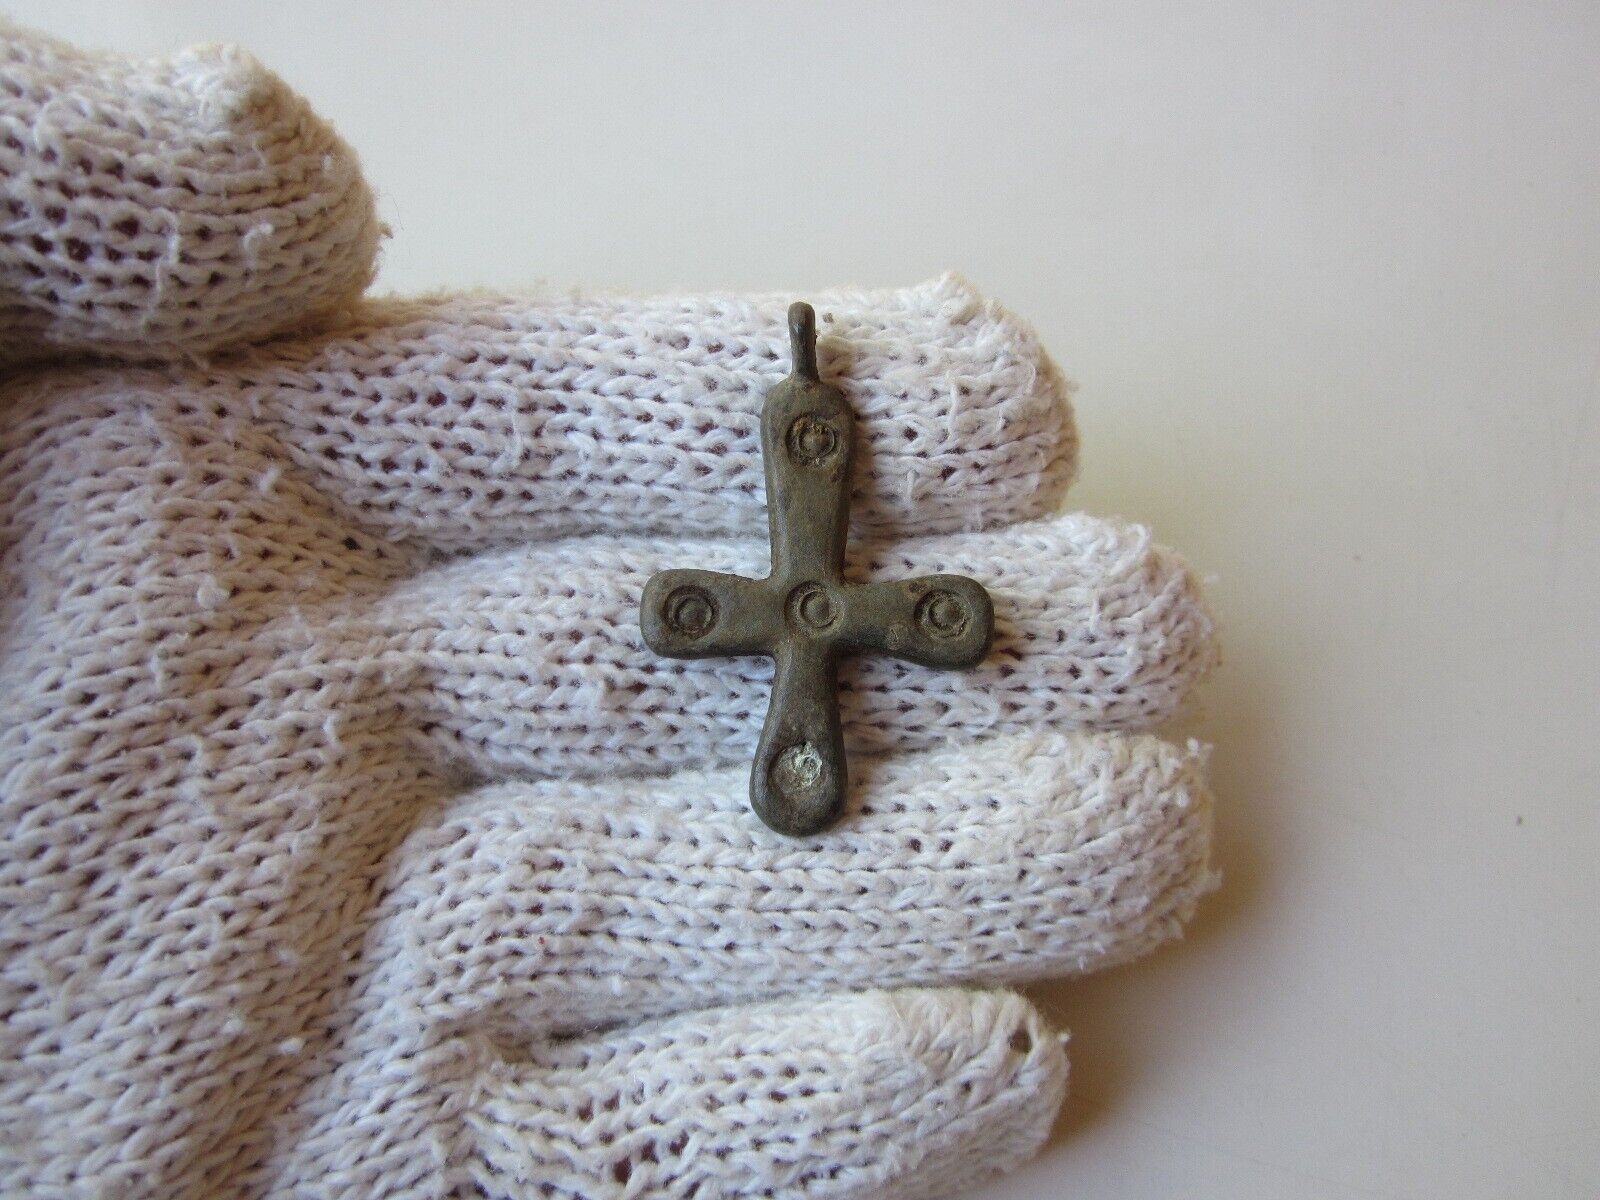 ancient late Roman or Byzantine lead engraved cross amulet pendant.